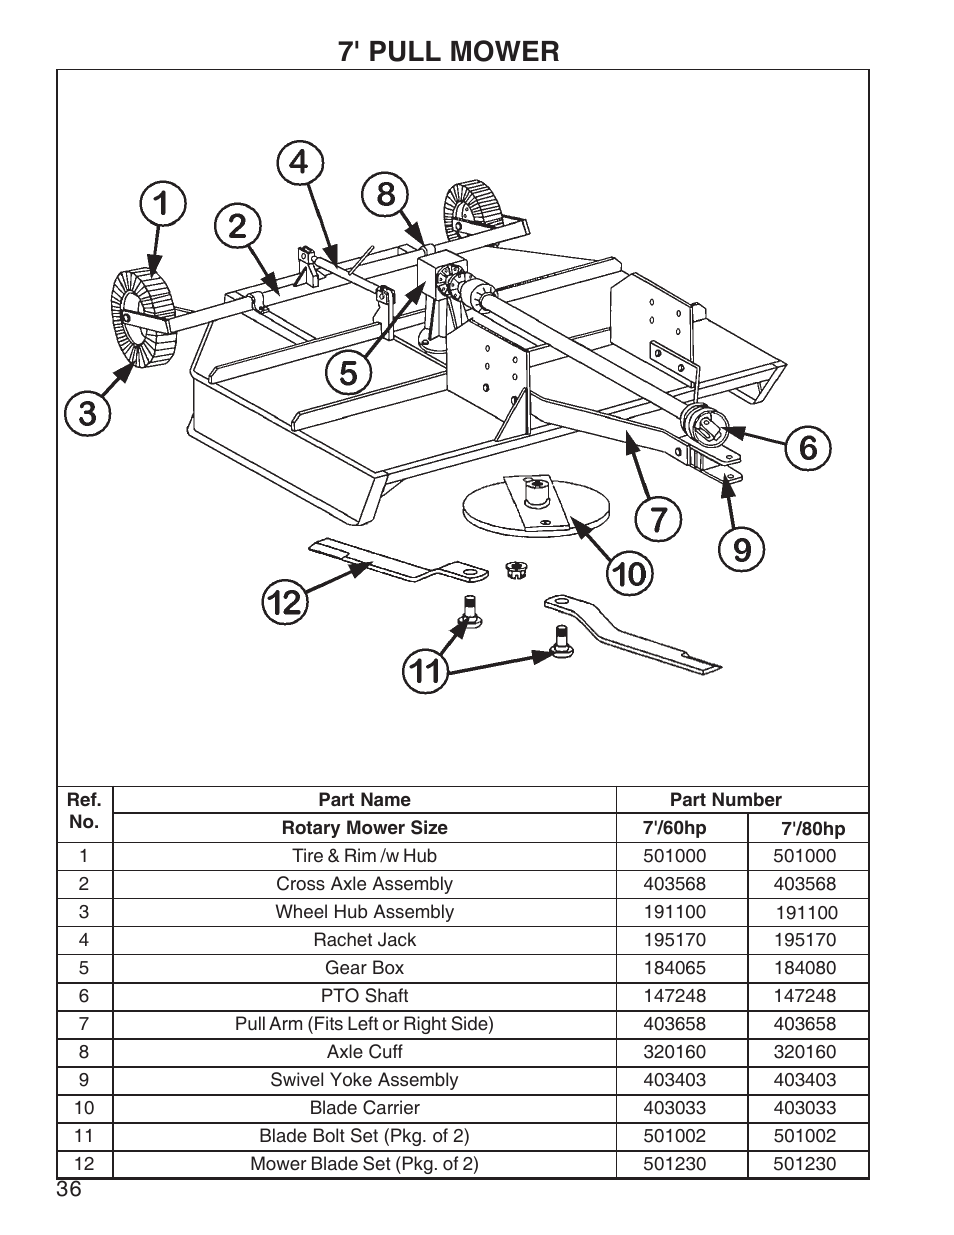 7' pull mower | King Kutter Rotary Mower User Manual | Page 36 / 46